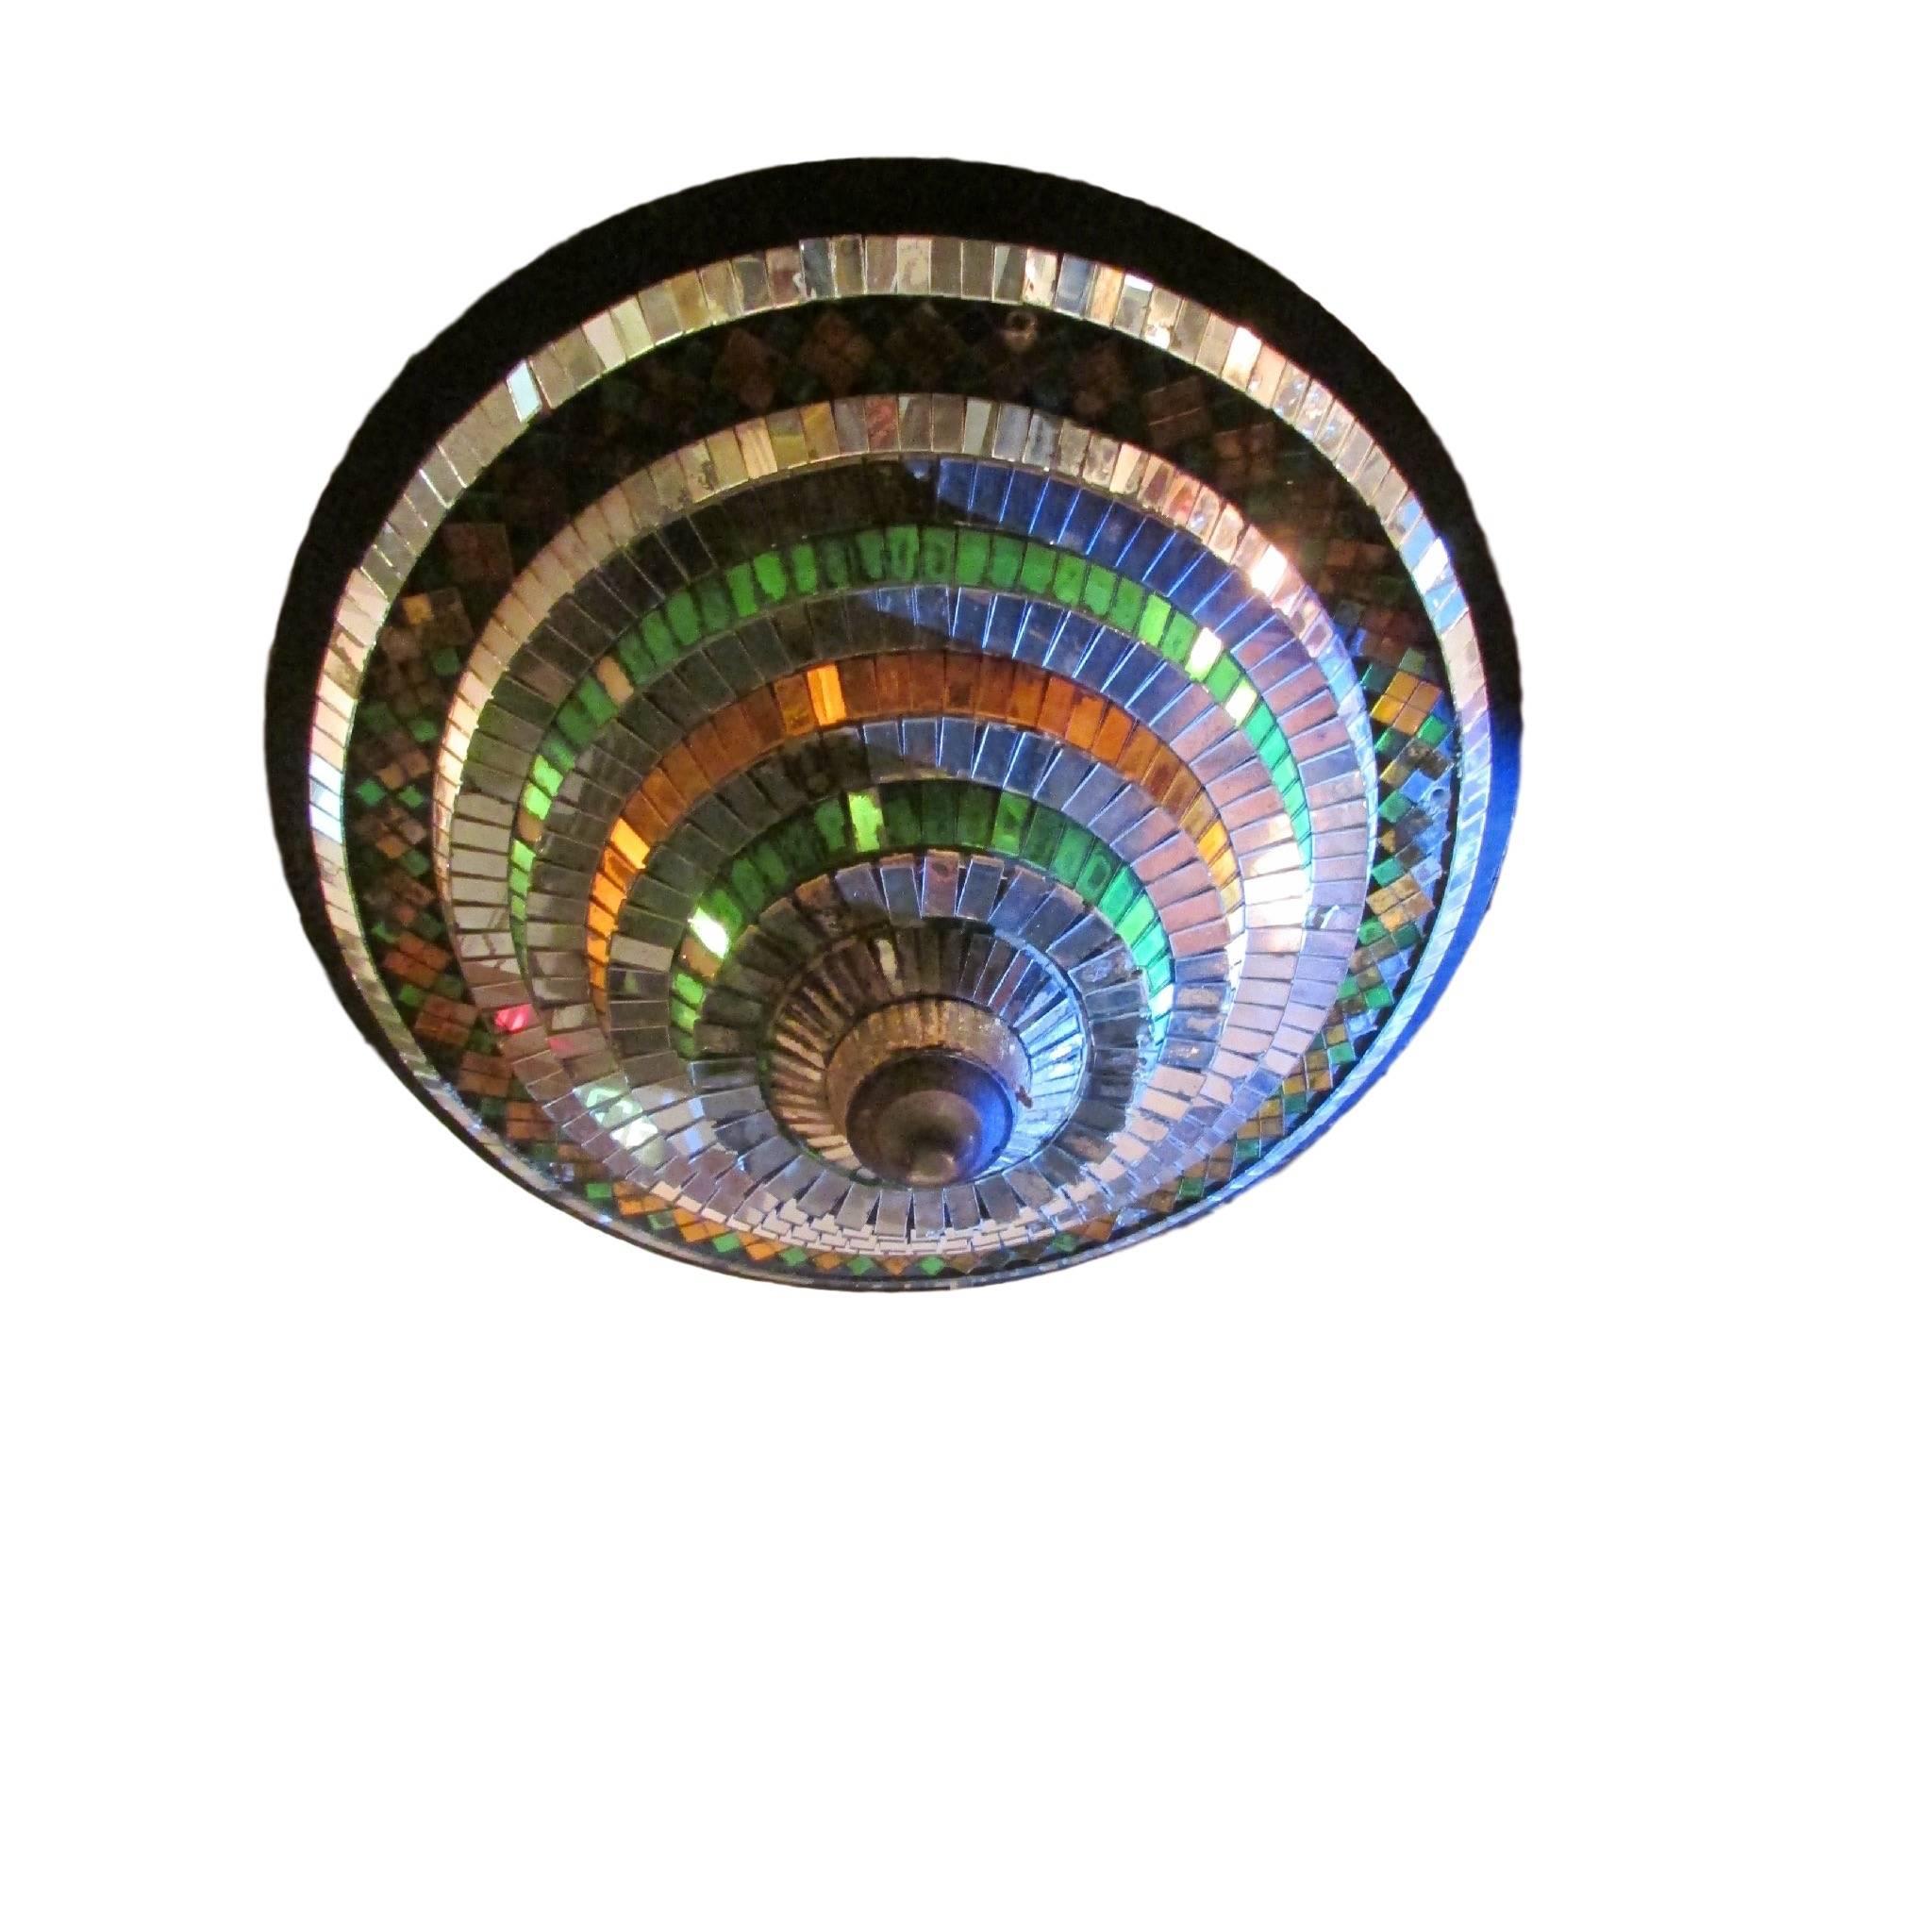 This rotating mirror ball is every bit as 